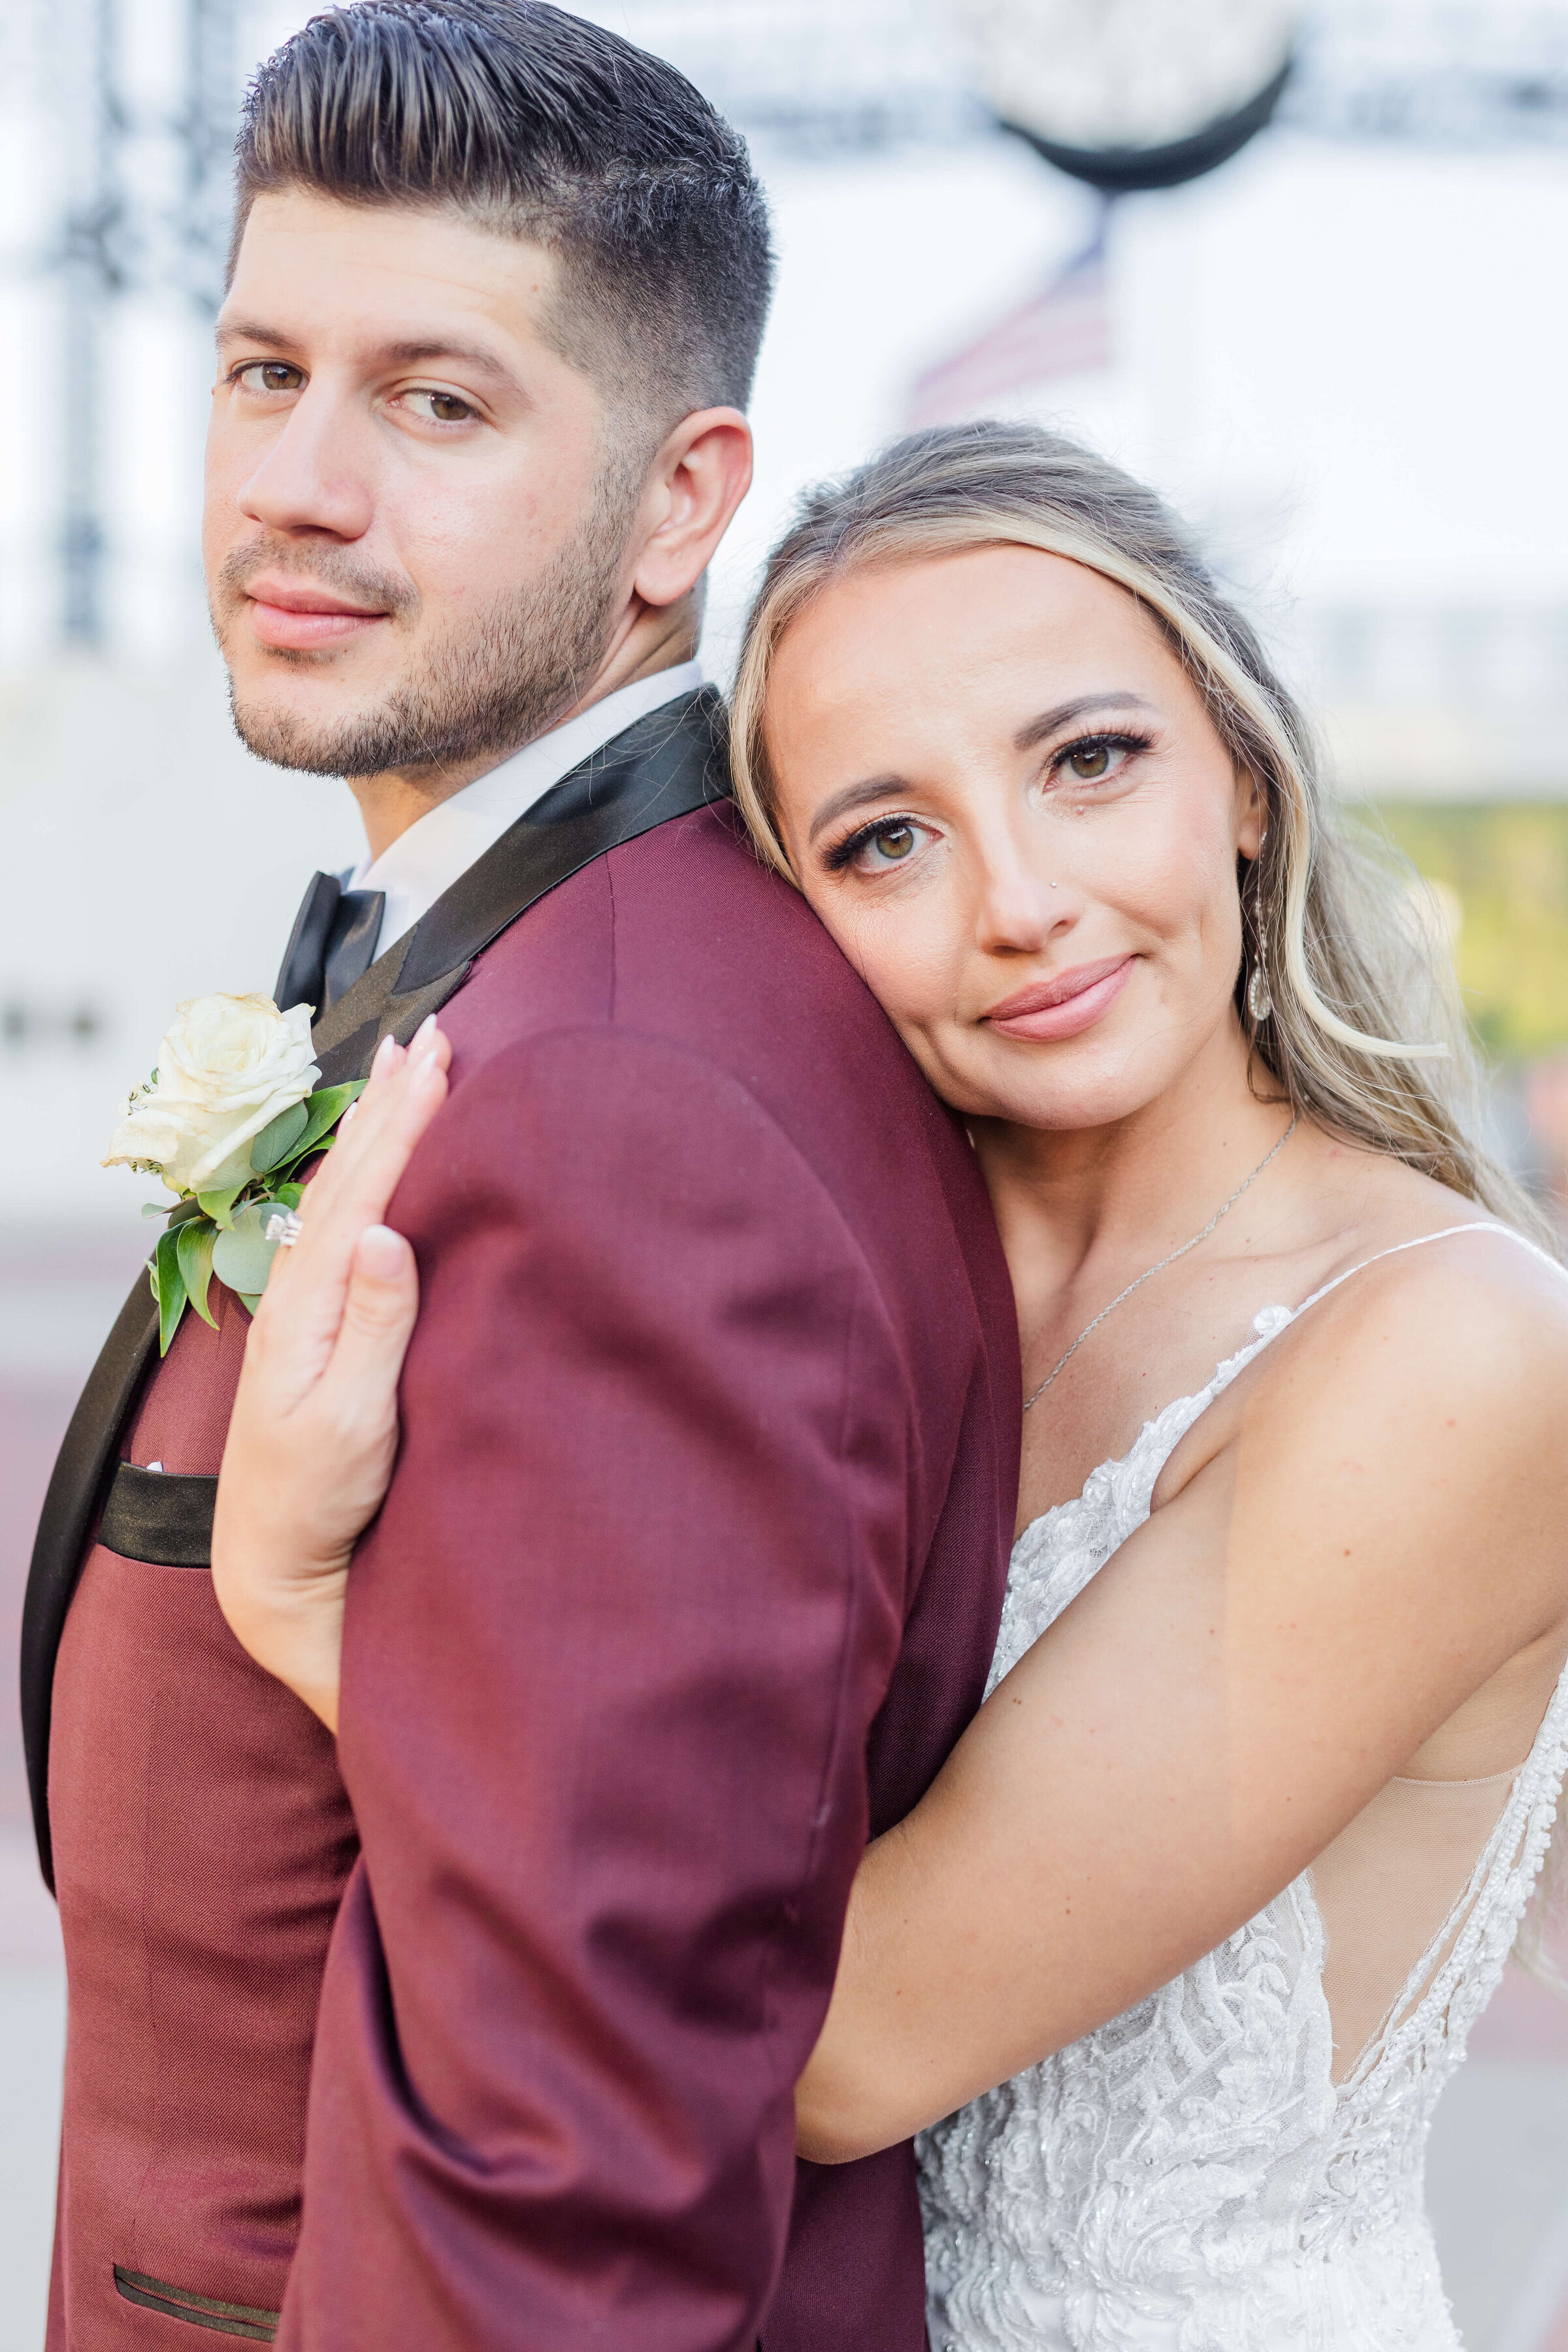 A groom in a maroon tux, looks at the camera as his bride hugs him from behind and she's also looking at the camera. The sun is glowing on them.